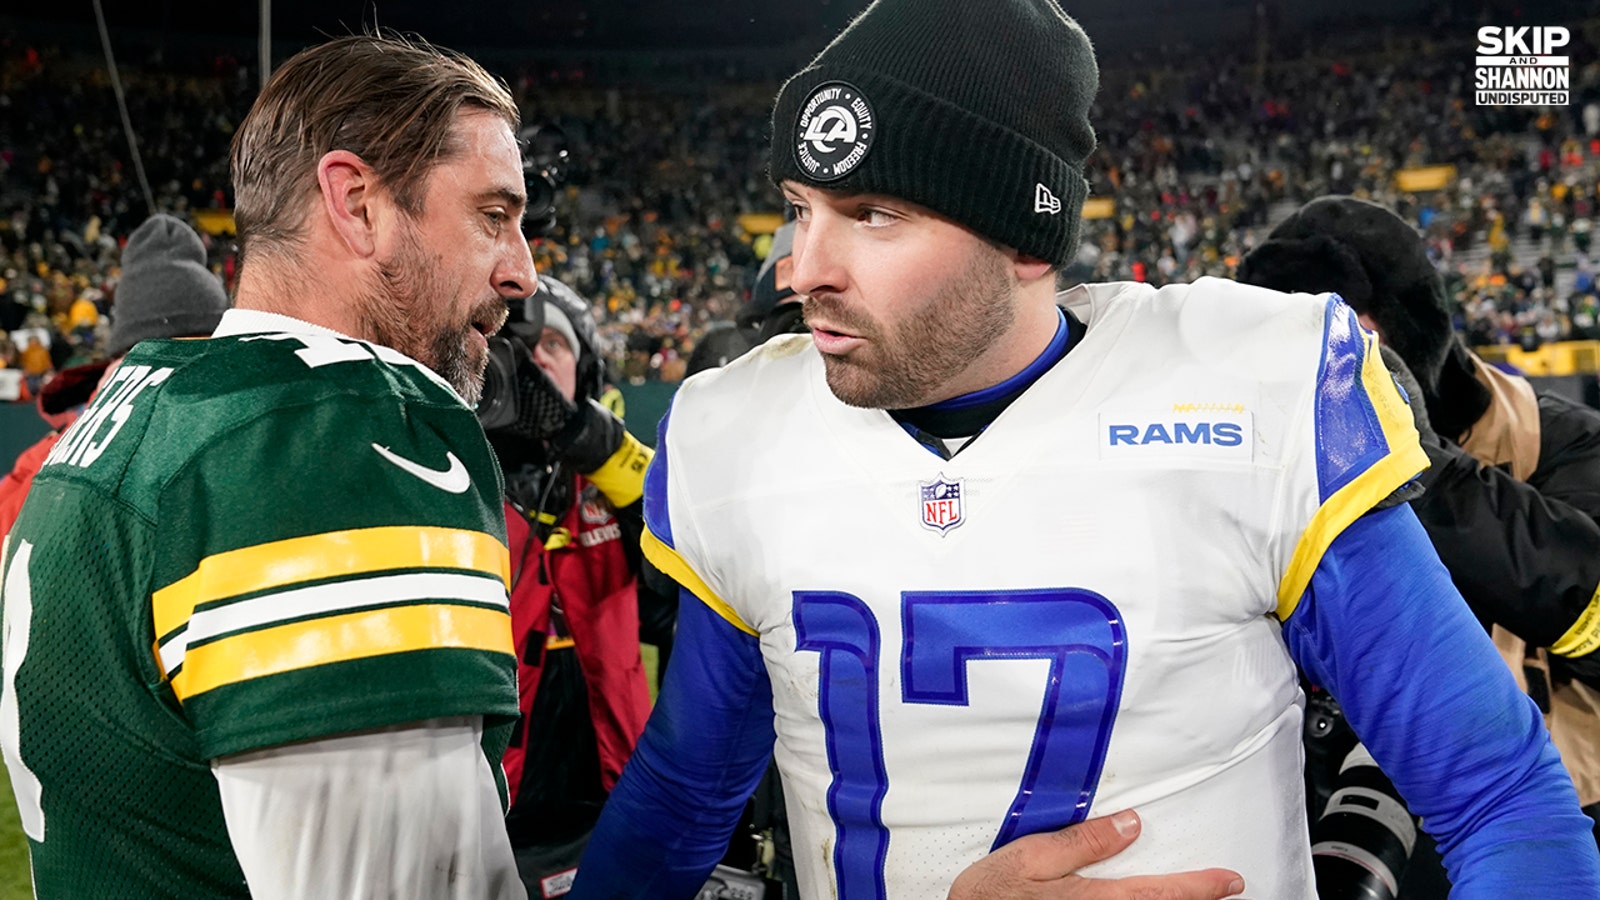 Aaron Rodgers leads Packers to MNF win over Baker Mayfield, Rams